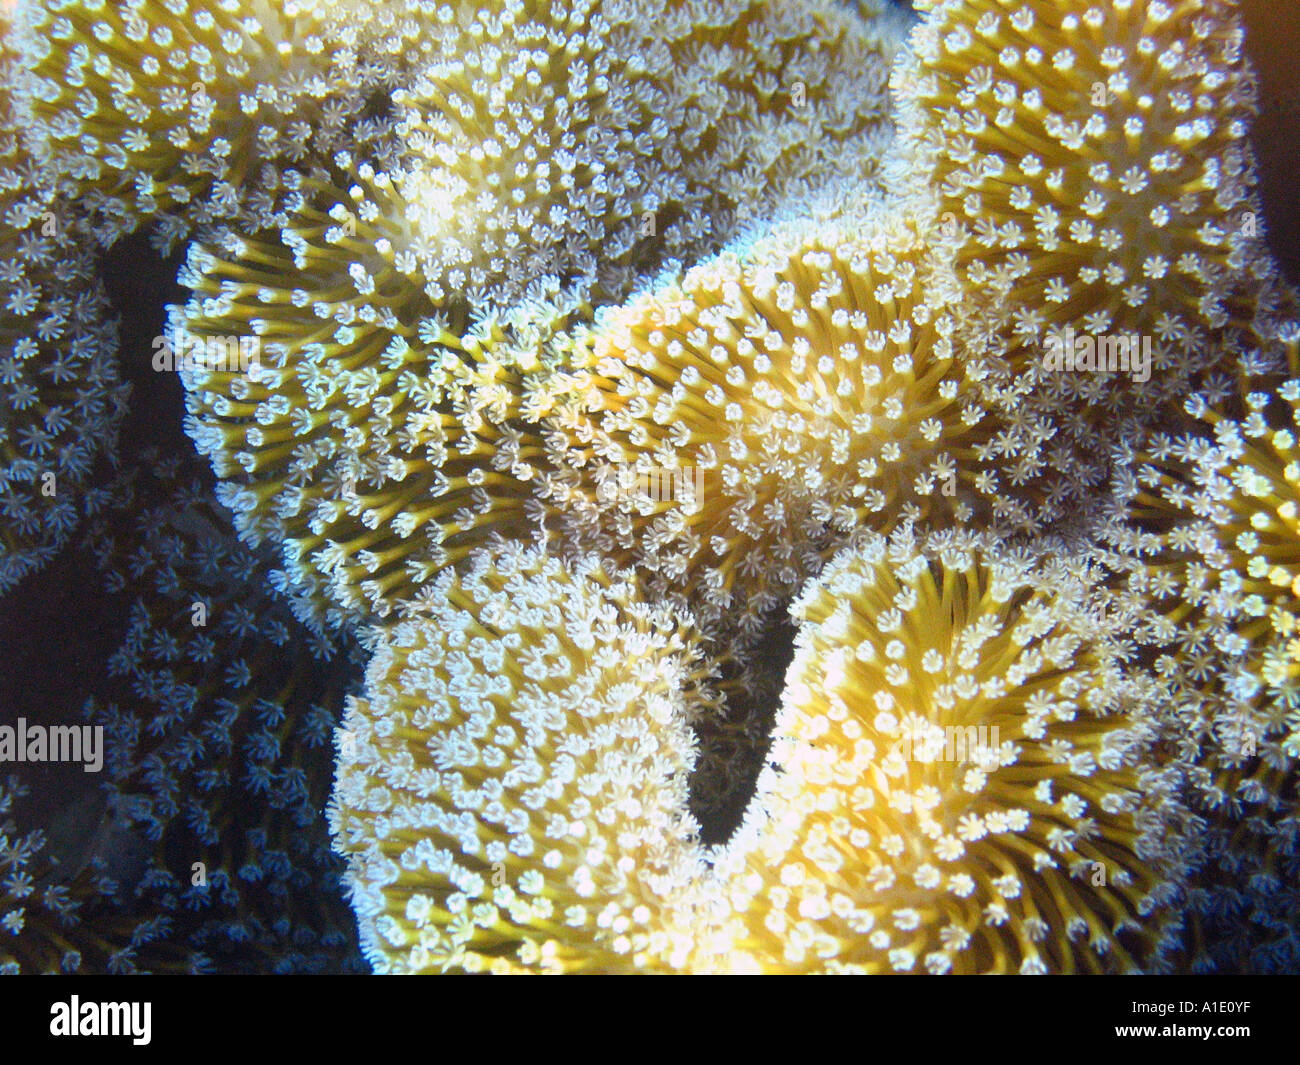 Leather Coral Polyp Sarcophyton Sp Stock Photo